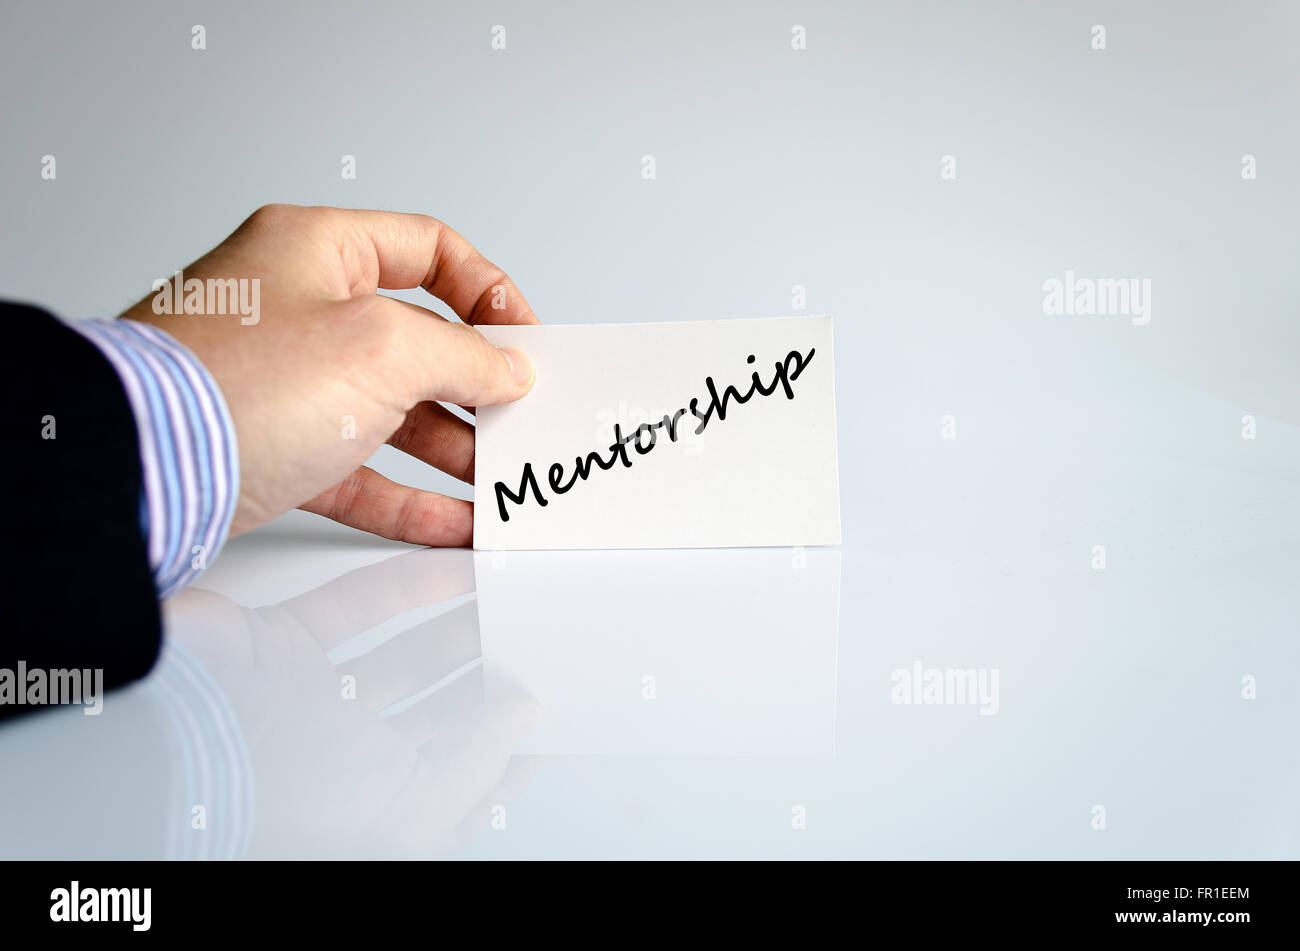 Mentorship text concept isolated over white background Stock Photo